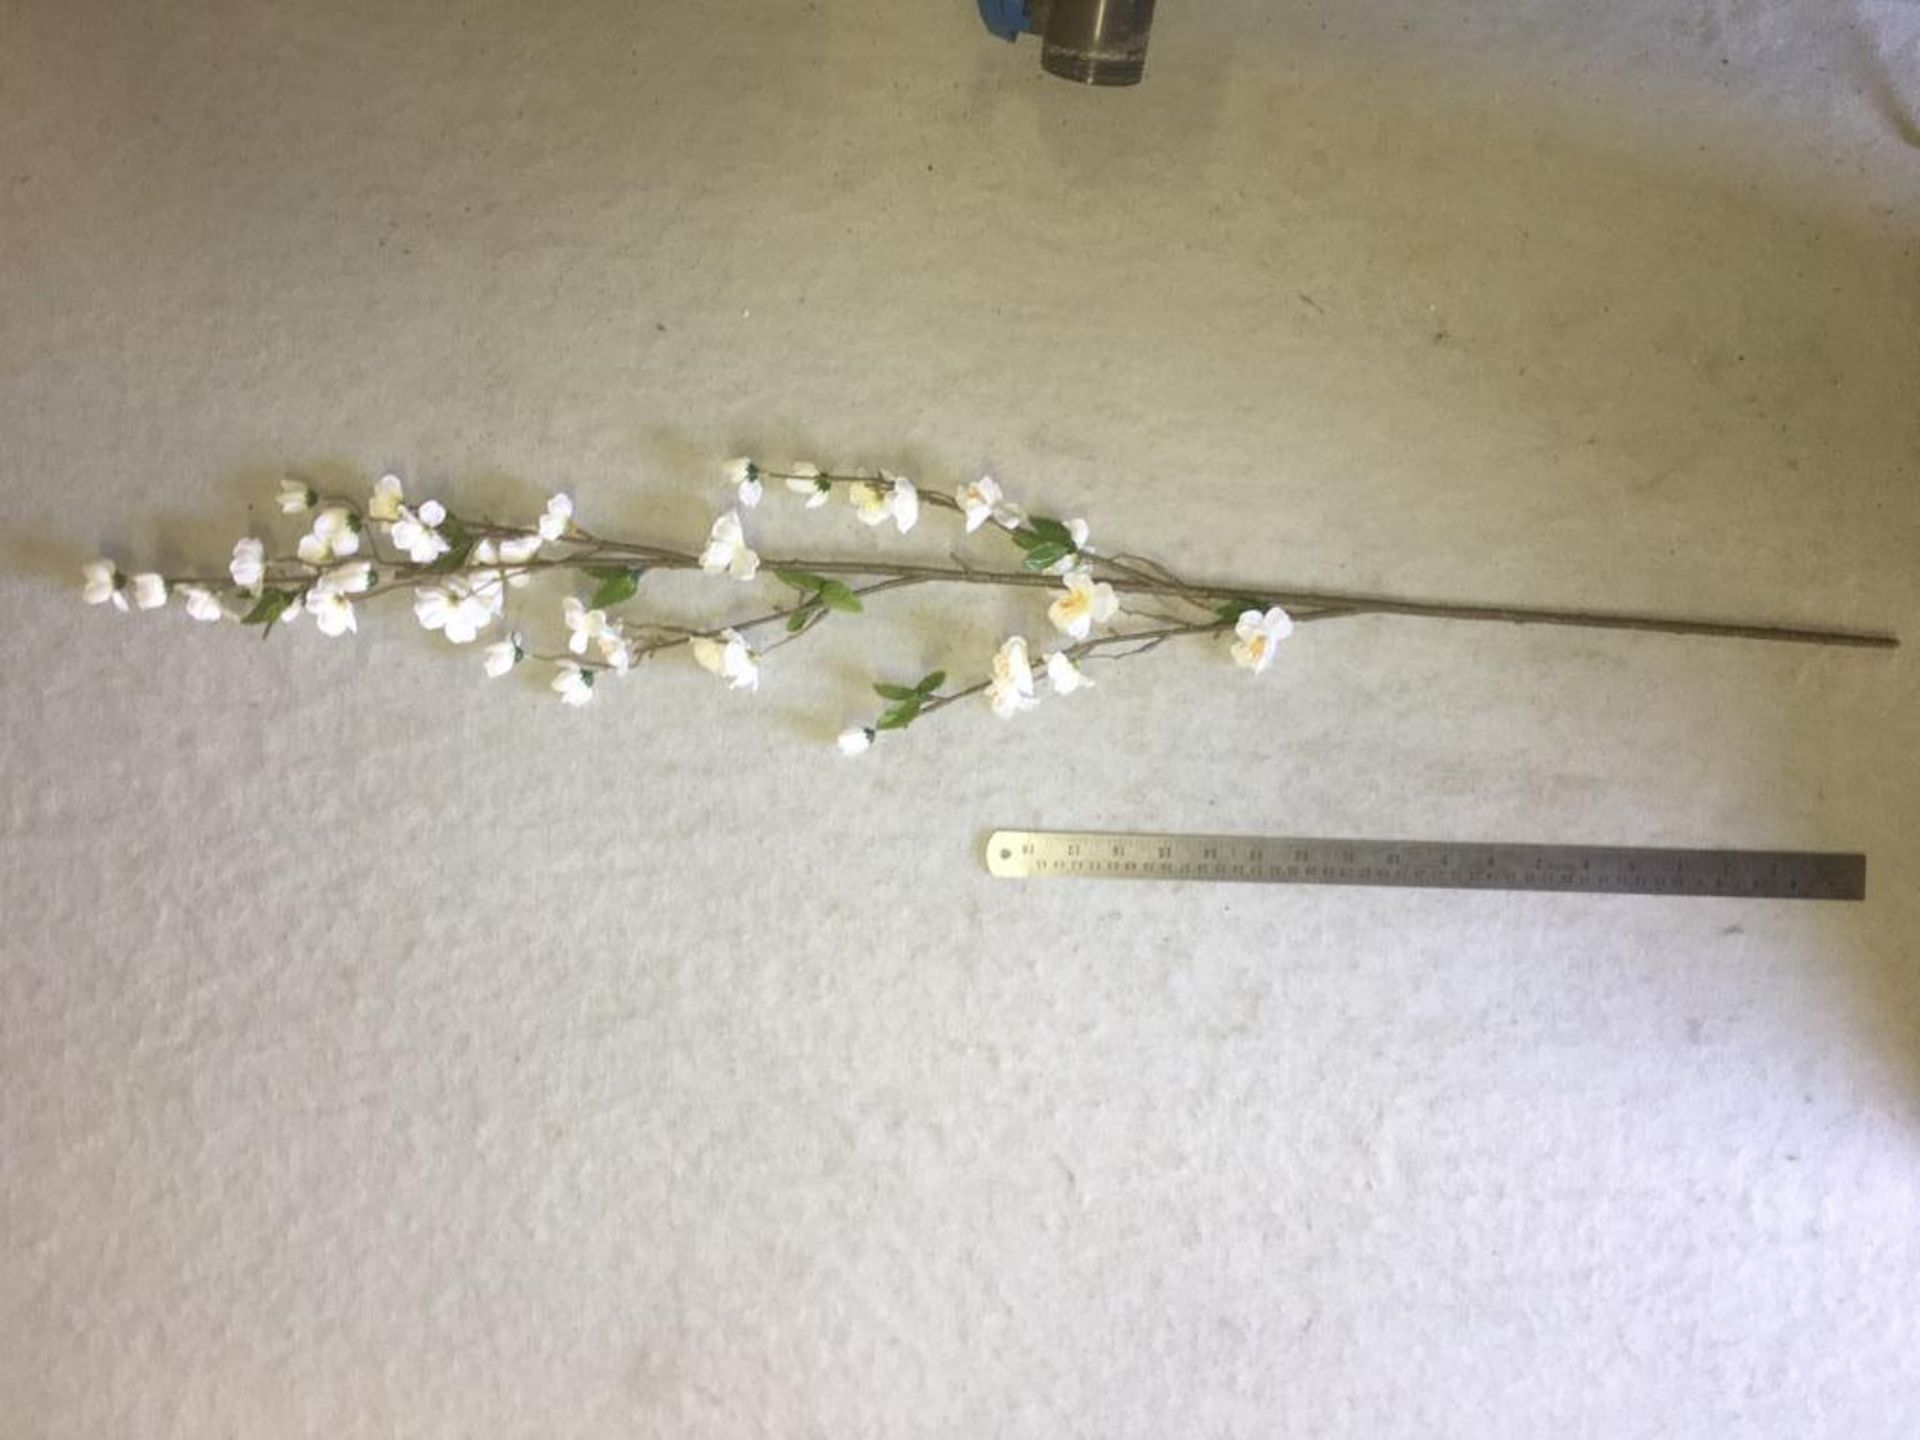 30 x Artificial White Blossom stem - used but in very good condition